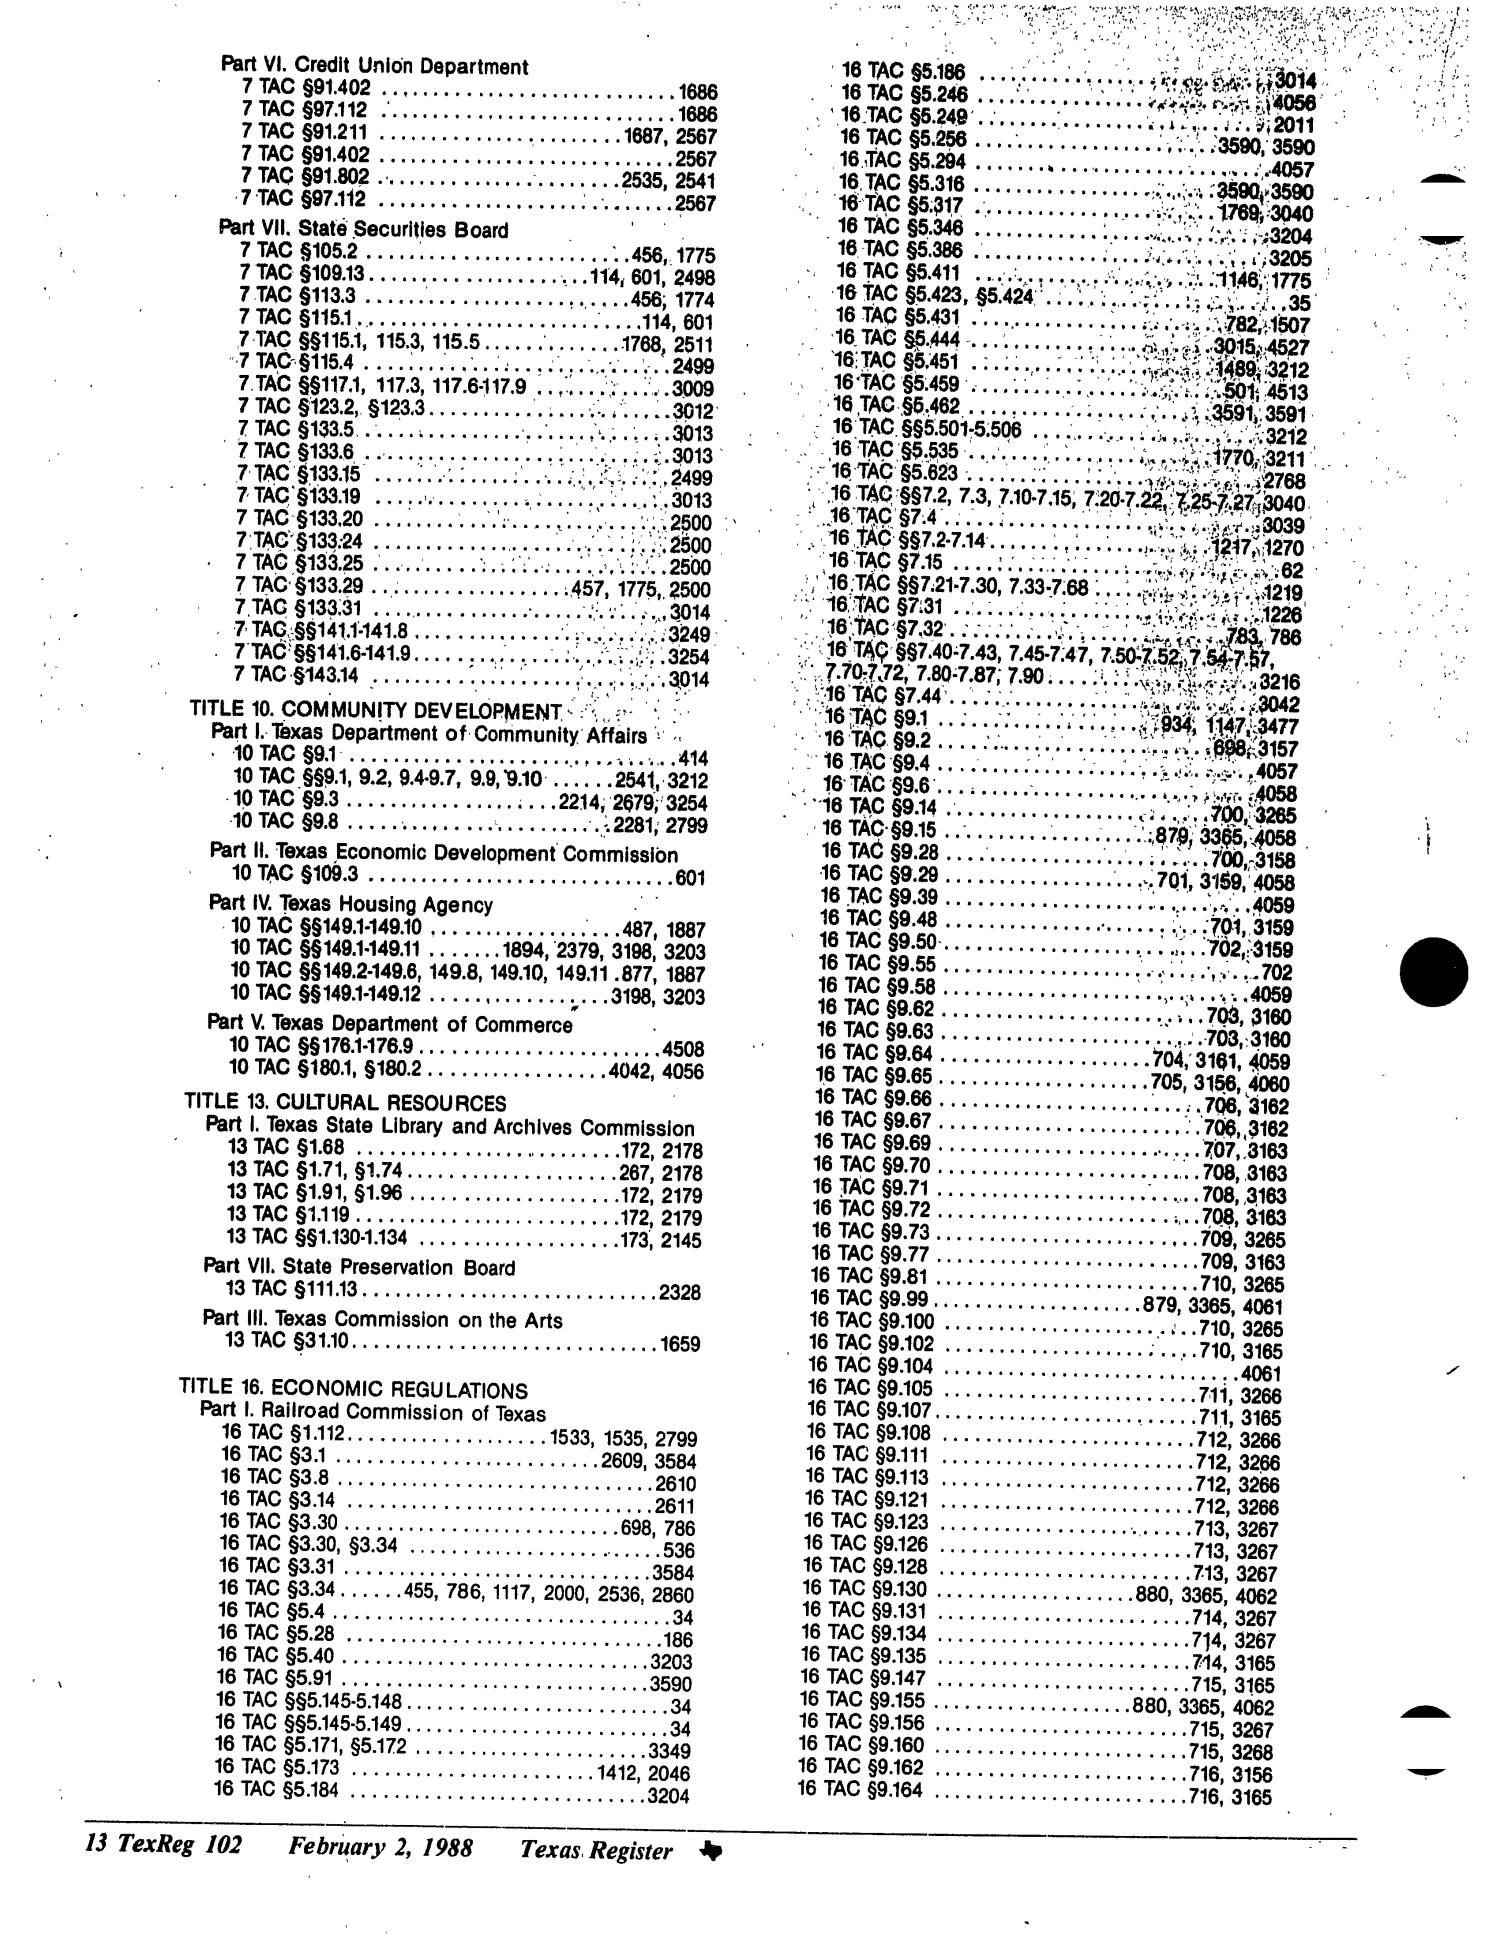 Texas Register: Annual Index January - December 1988, Volume 13 Numbers [1-96] - pages 225-350, February 3, 1989
                                                
                                                    102
                                                